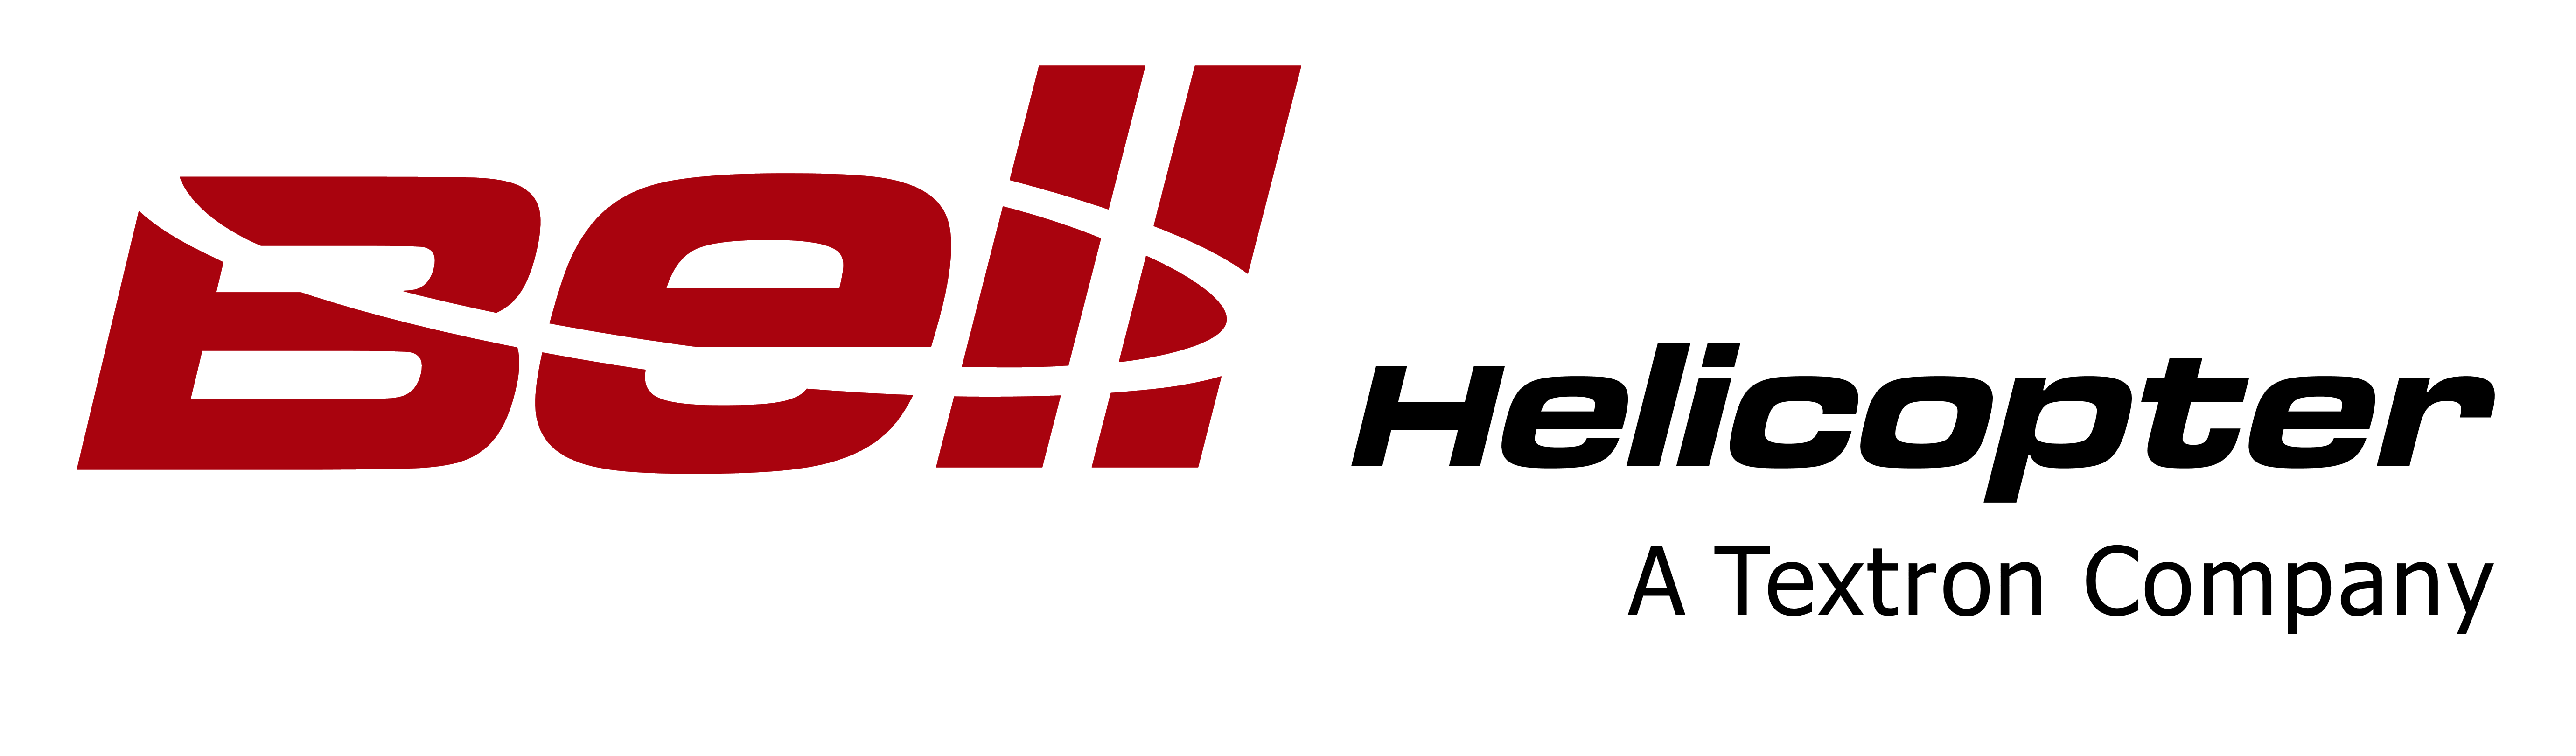 Helicopter Logo - Bell Helicopter – Logos, brands and logotypes